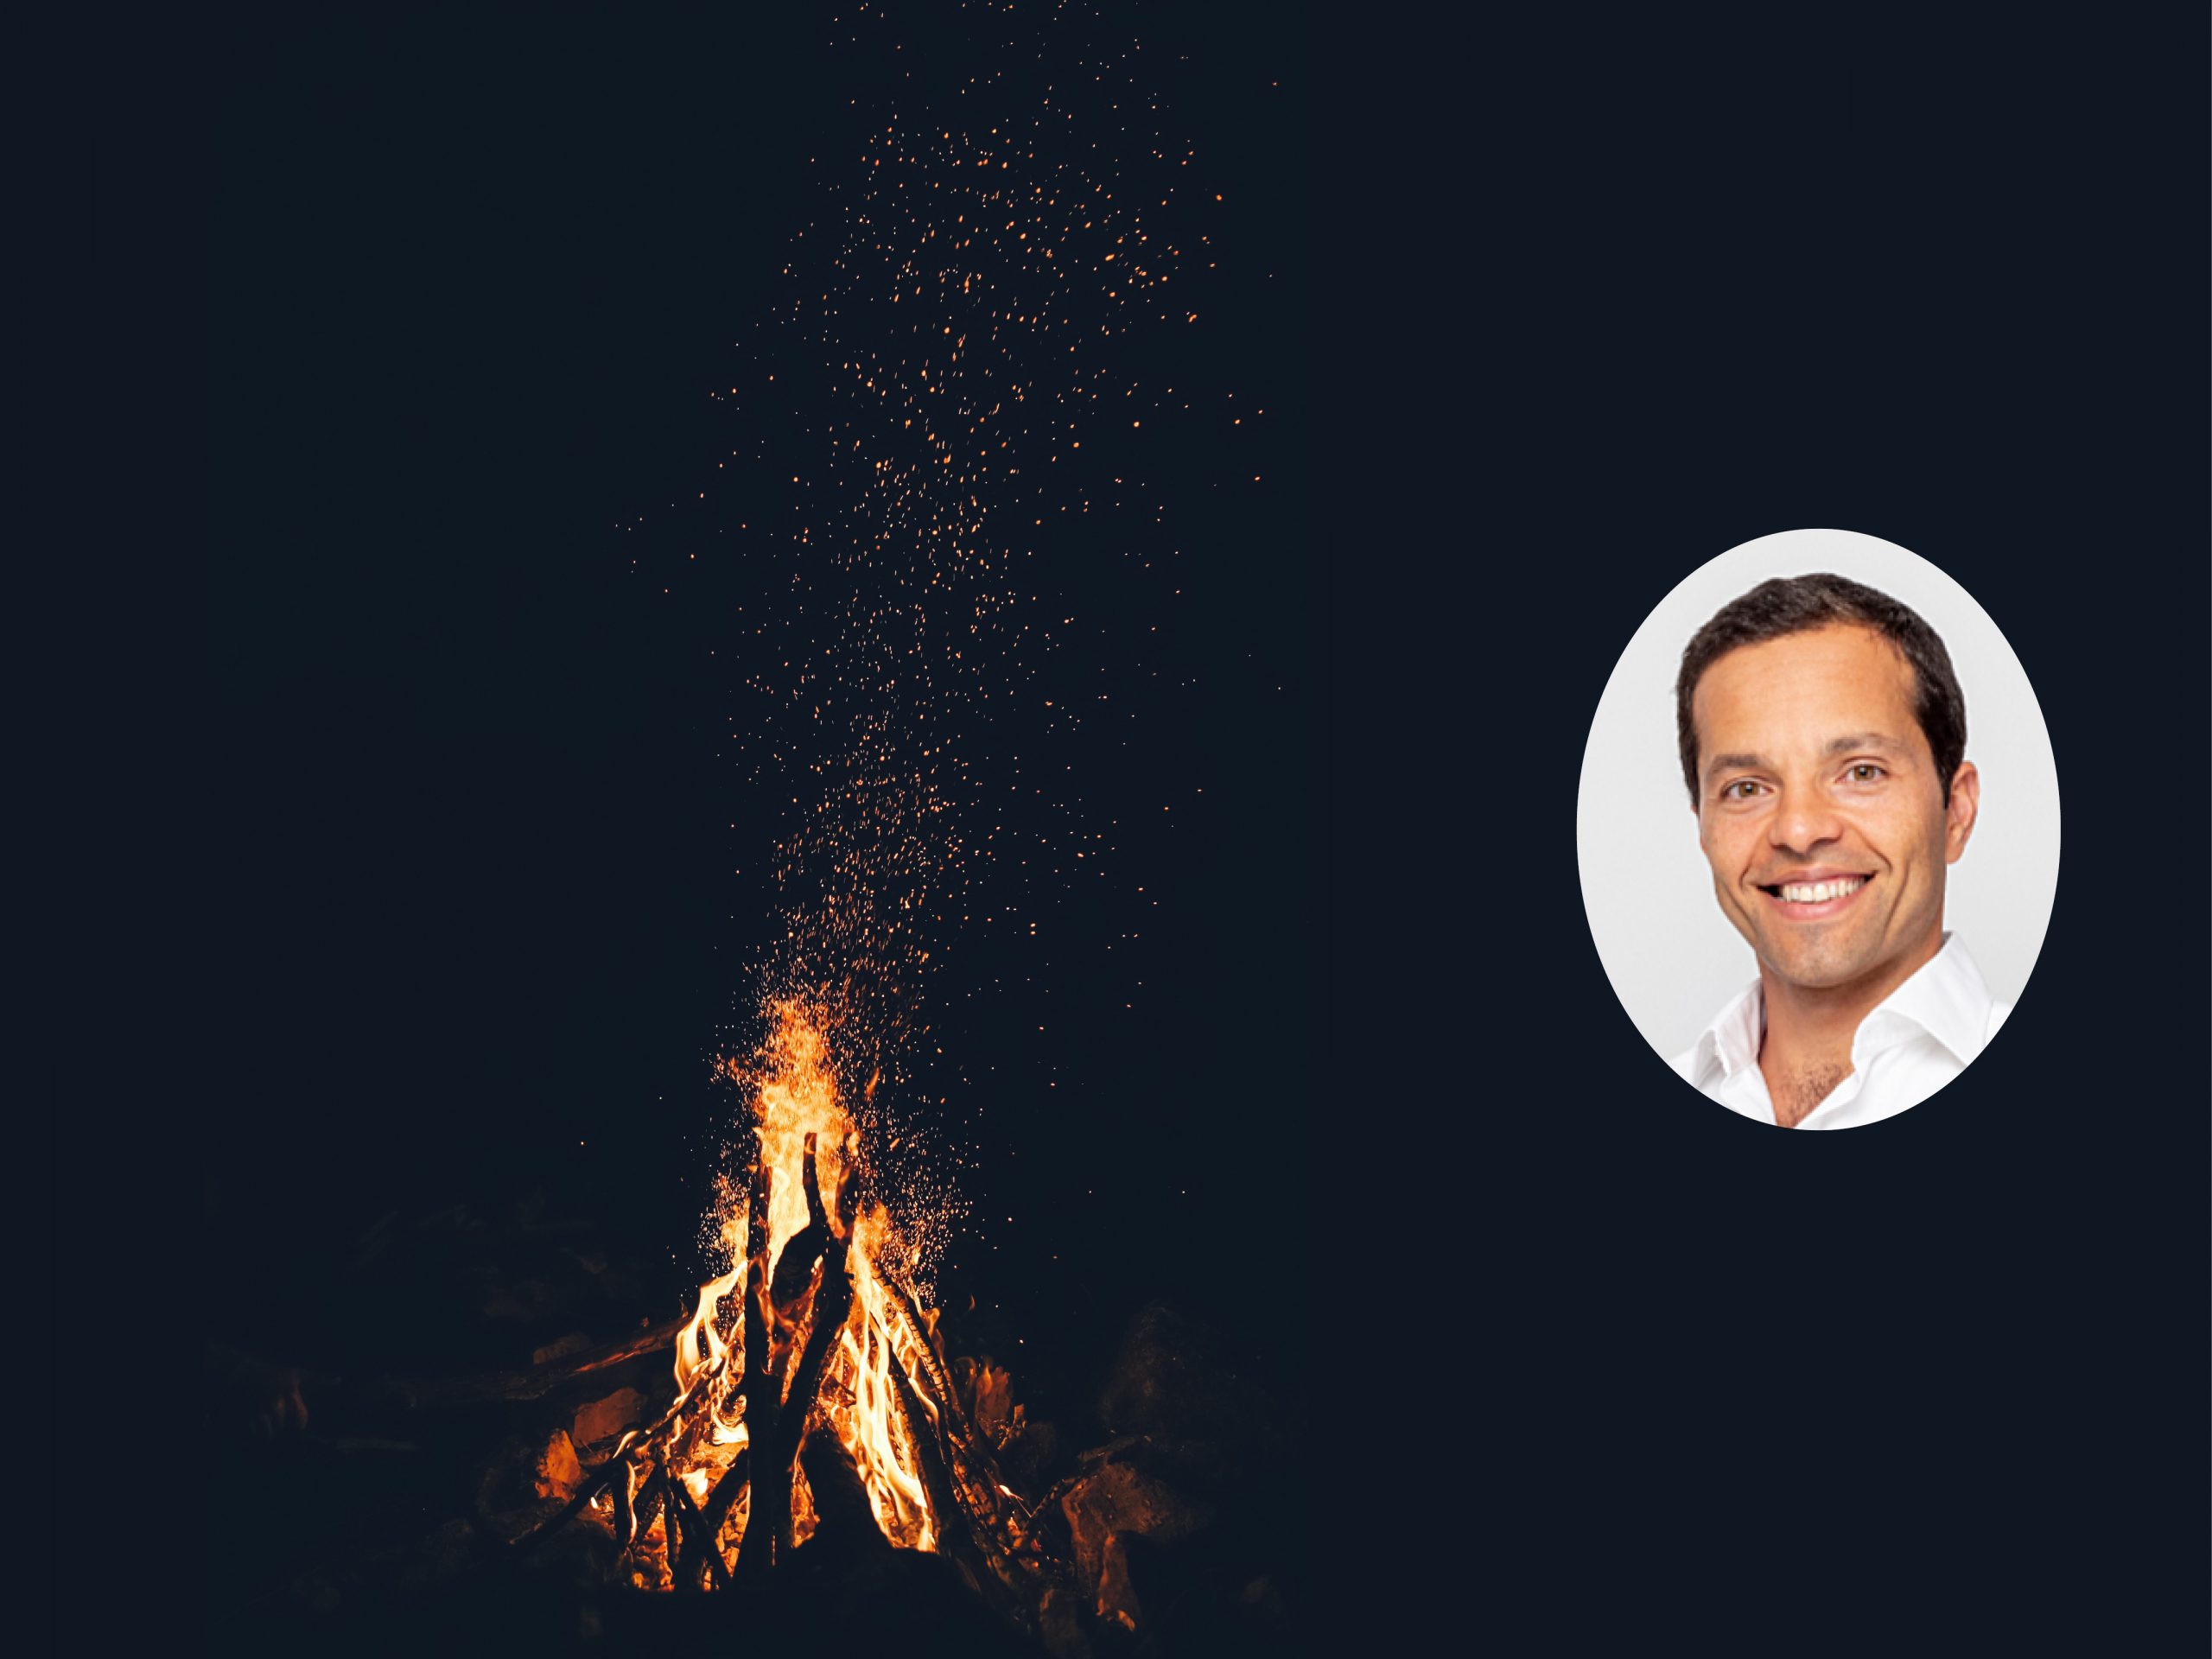 Fireside chat: Funding for Space Ventures with Rodolfo Condessa